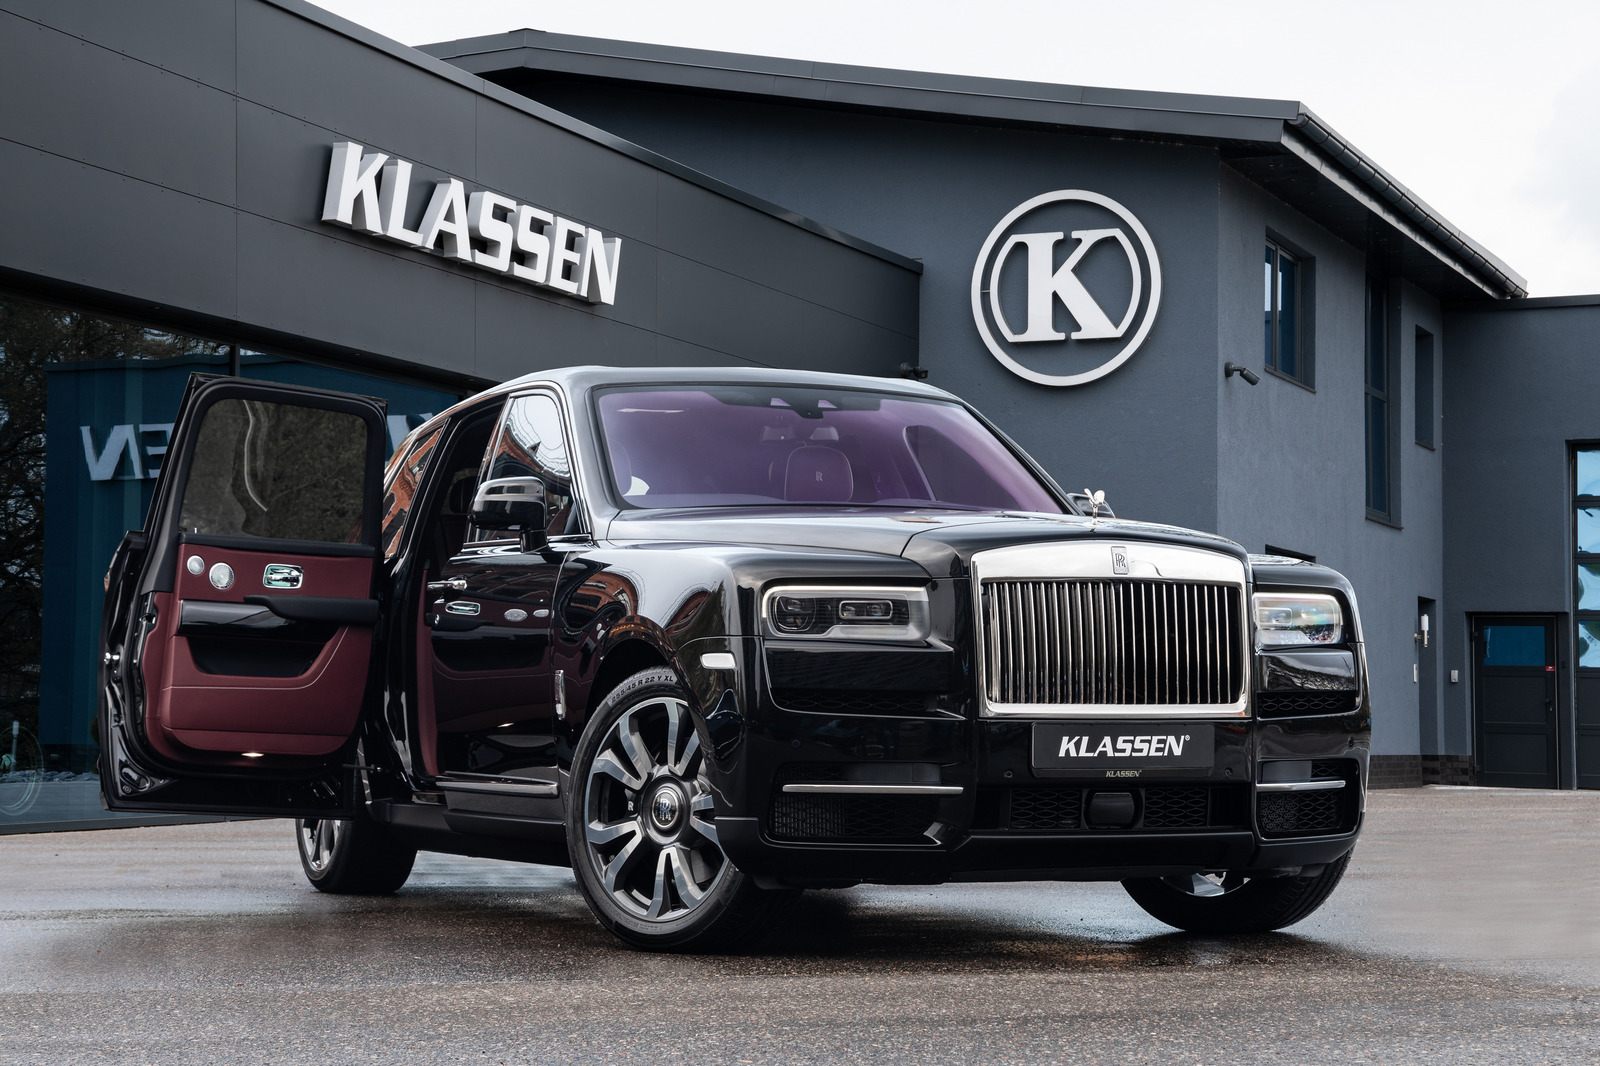 bao michael jordan surprised the world when he gifted the luxury car rolls royce cullinan rs to congratulate his teammate on becoming an nba legend 65395e3067d5f Michael Jordan Surprised The World When He Gifted The Luxury Car Rolls-royce Cullinan Rs To Congratulate His Teammate On Becoming An Nba Legend.